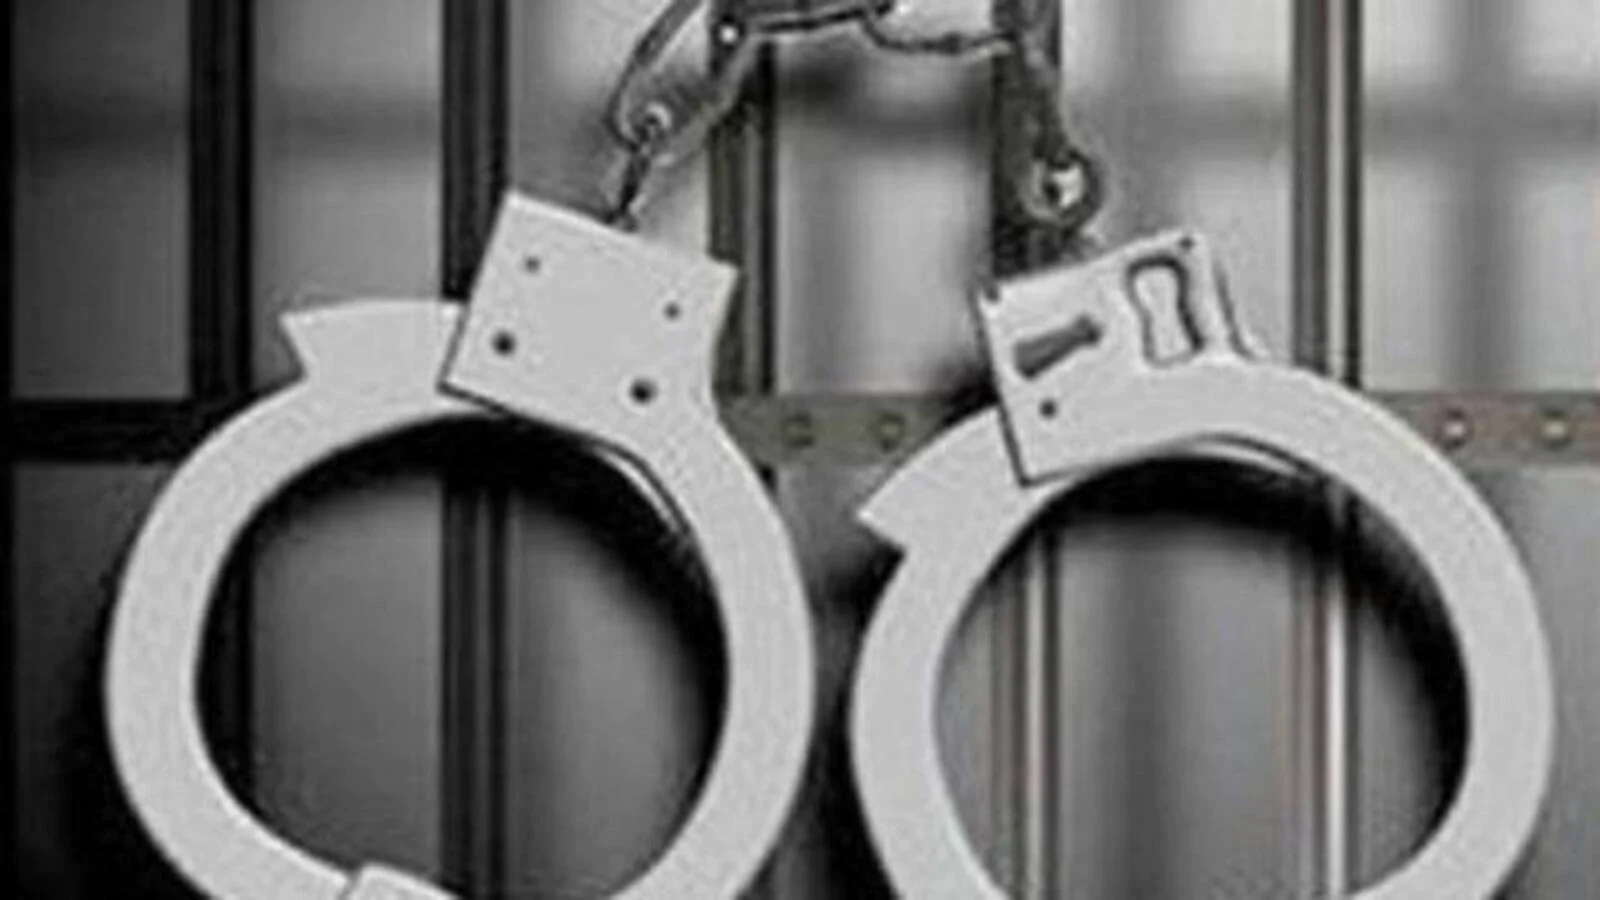 Indian JMB operative held in Bengal after arrest of Bangladeshis in MP